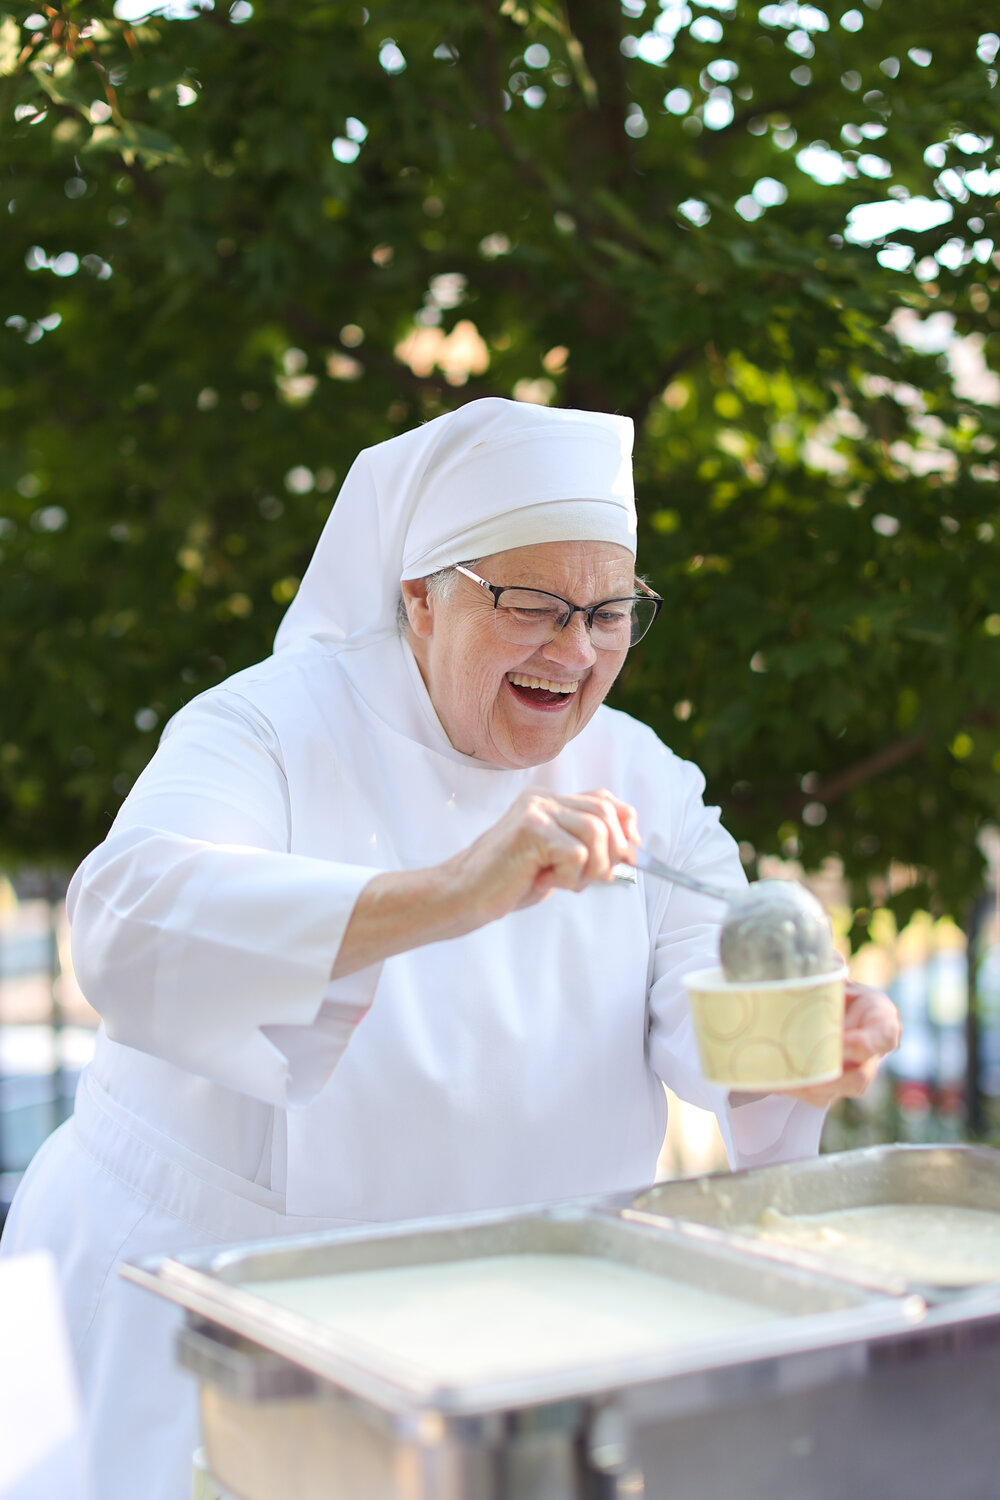 The Little Sisters of the Poor hosted a Summer Soirée on August 23. The event, which took place at the Jeanne Jugan Residence, was held to support the sisters’ ministry of caring for the elderly poor in Rhode Island. The event featured small bites and beverages from area restaurants in a delightful garden setting.